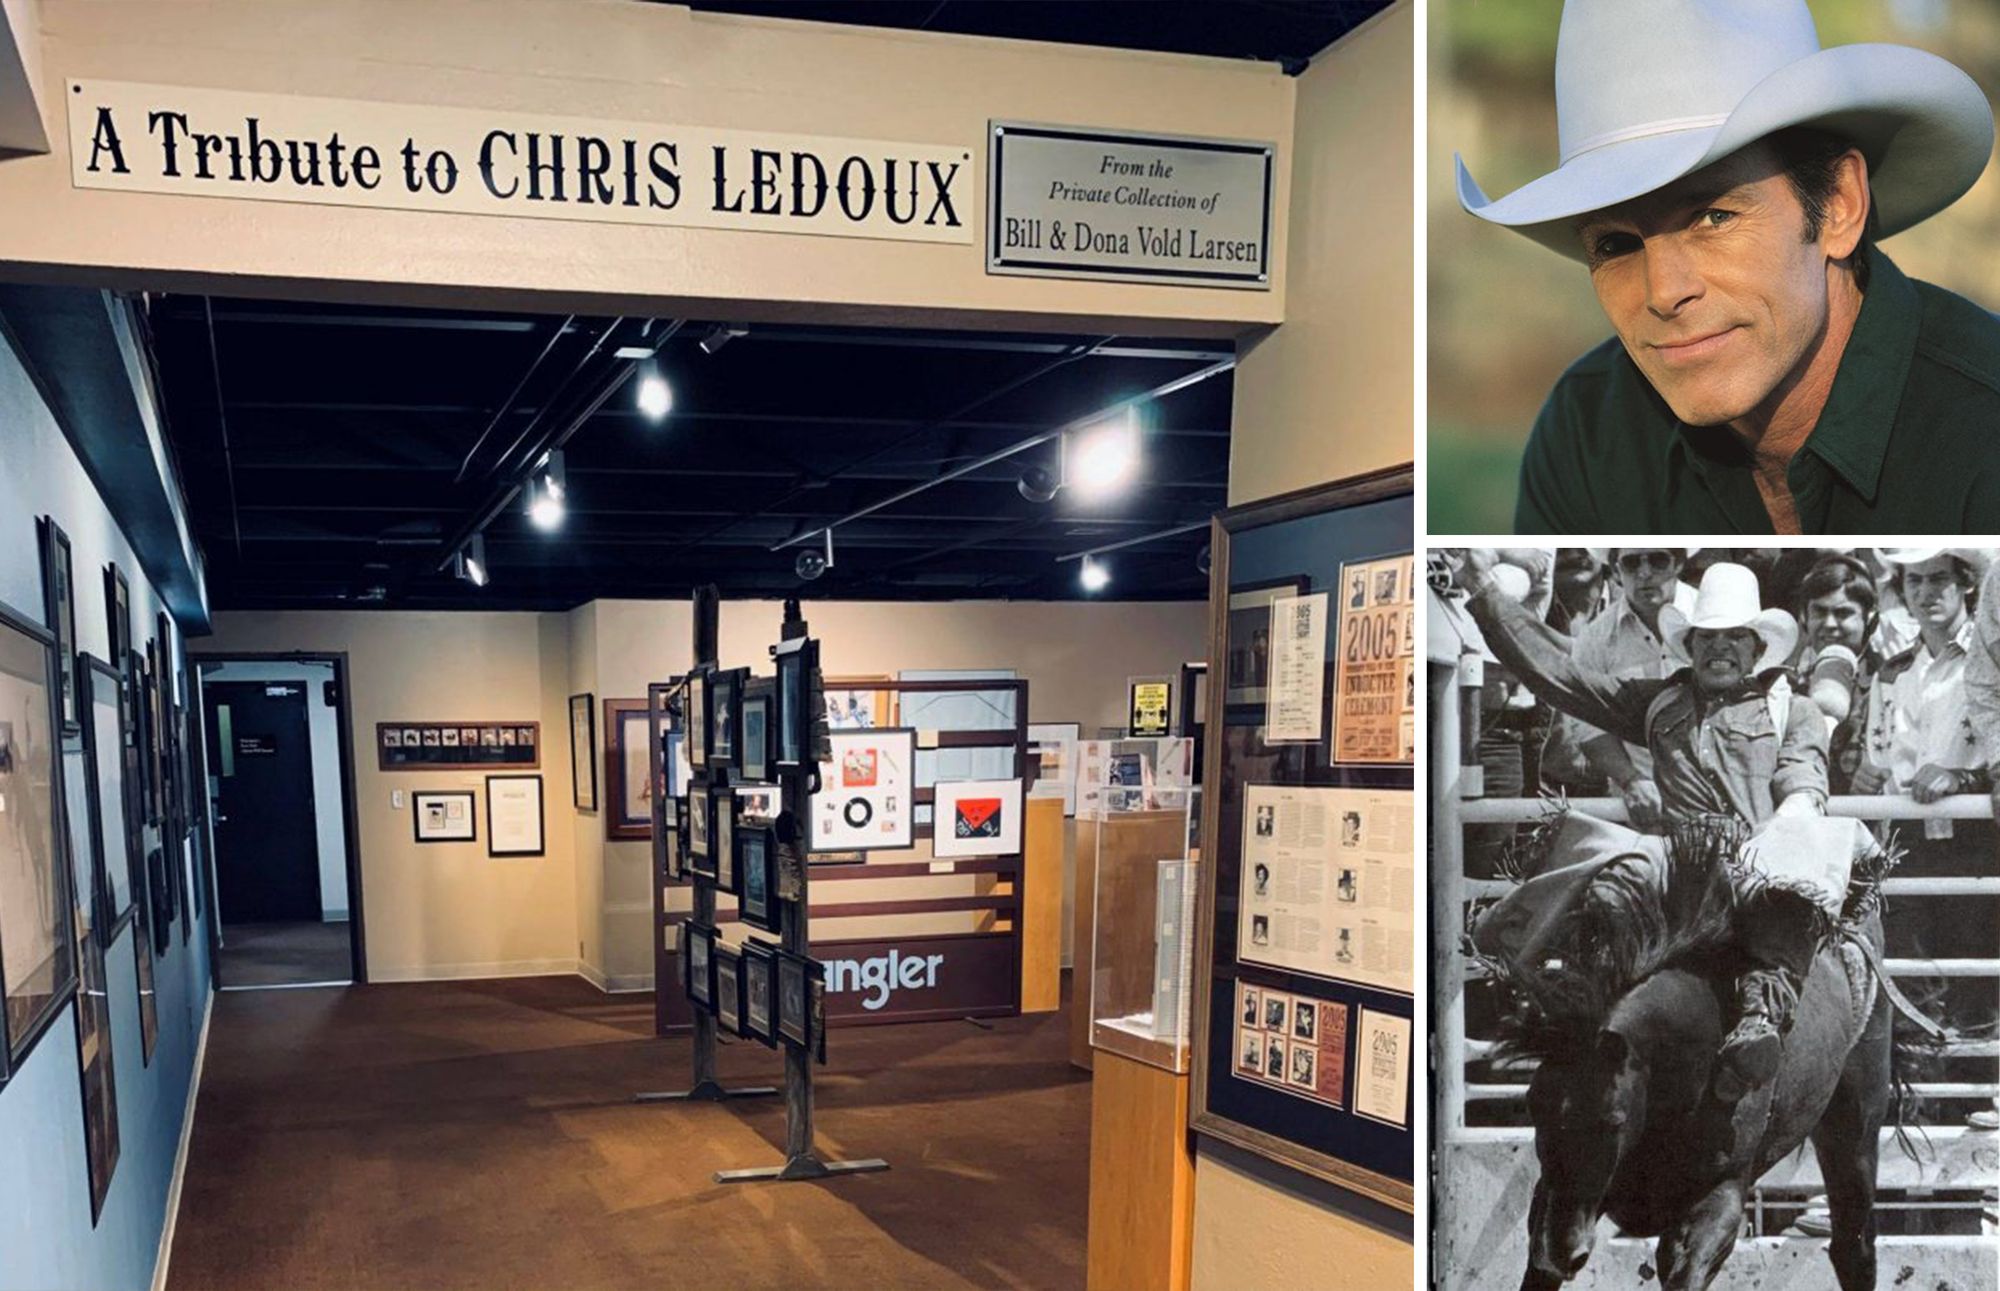 "A Tribute To Chris LeDoux" On Display At The ProRodeo Hall Of Fame